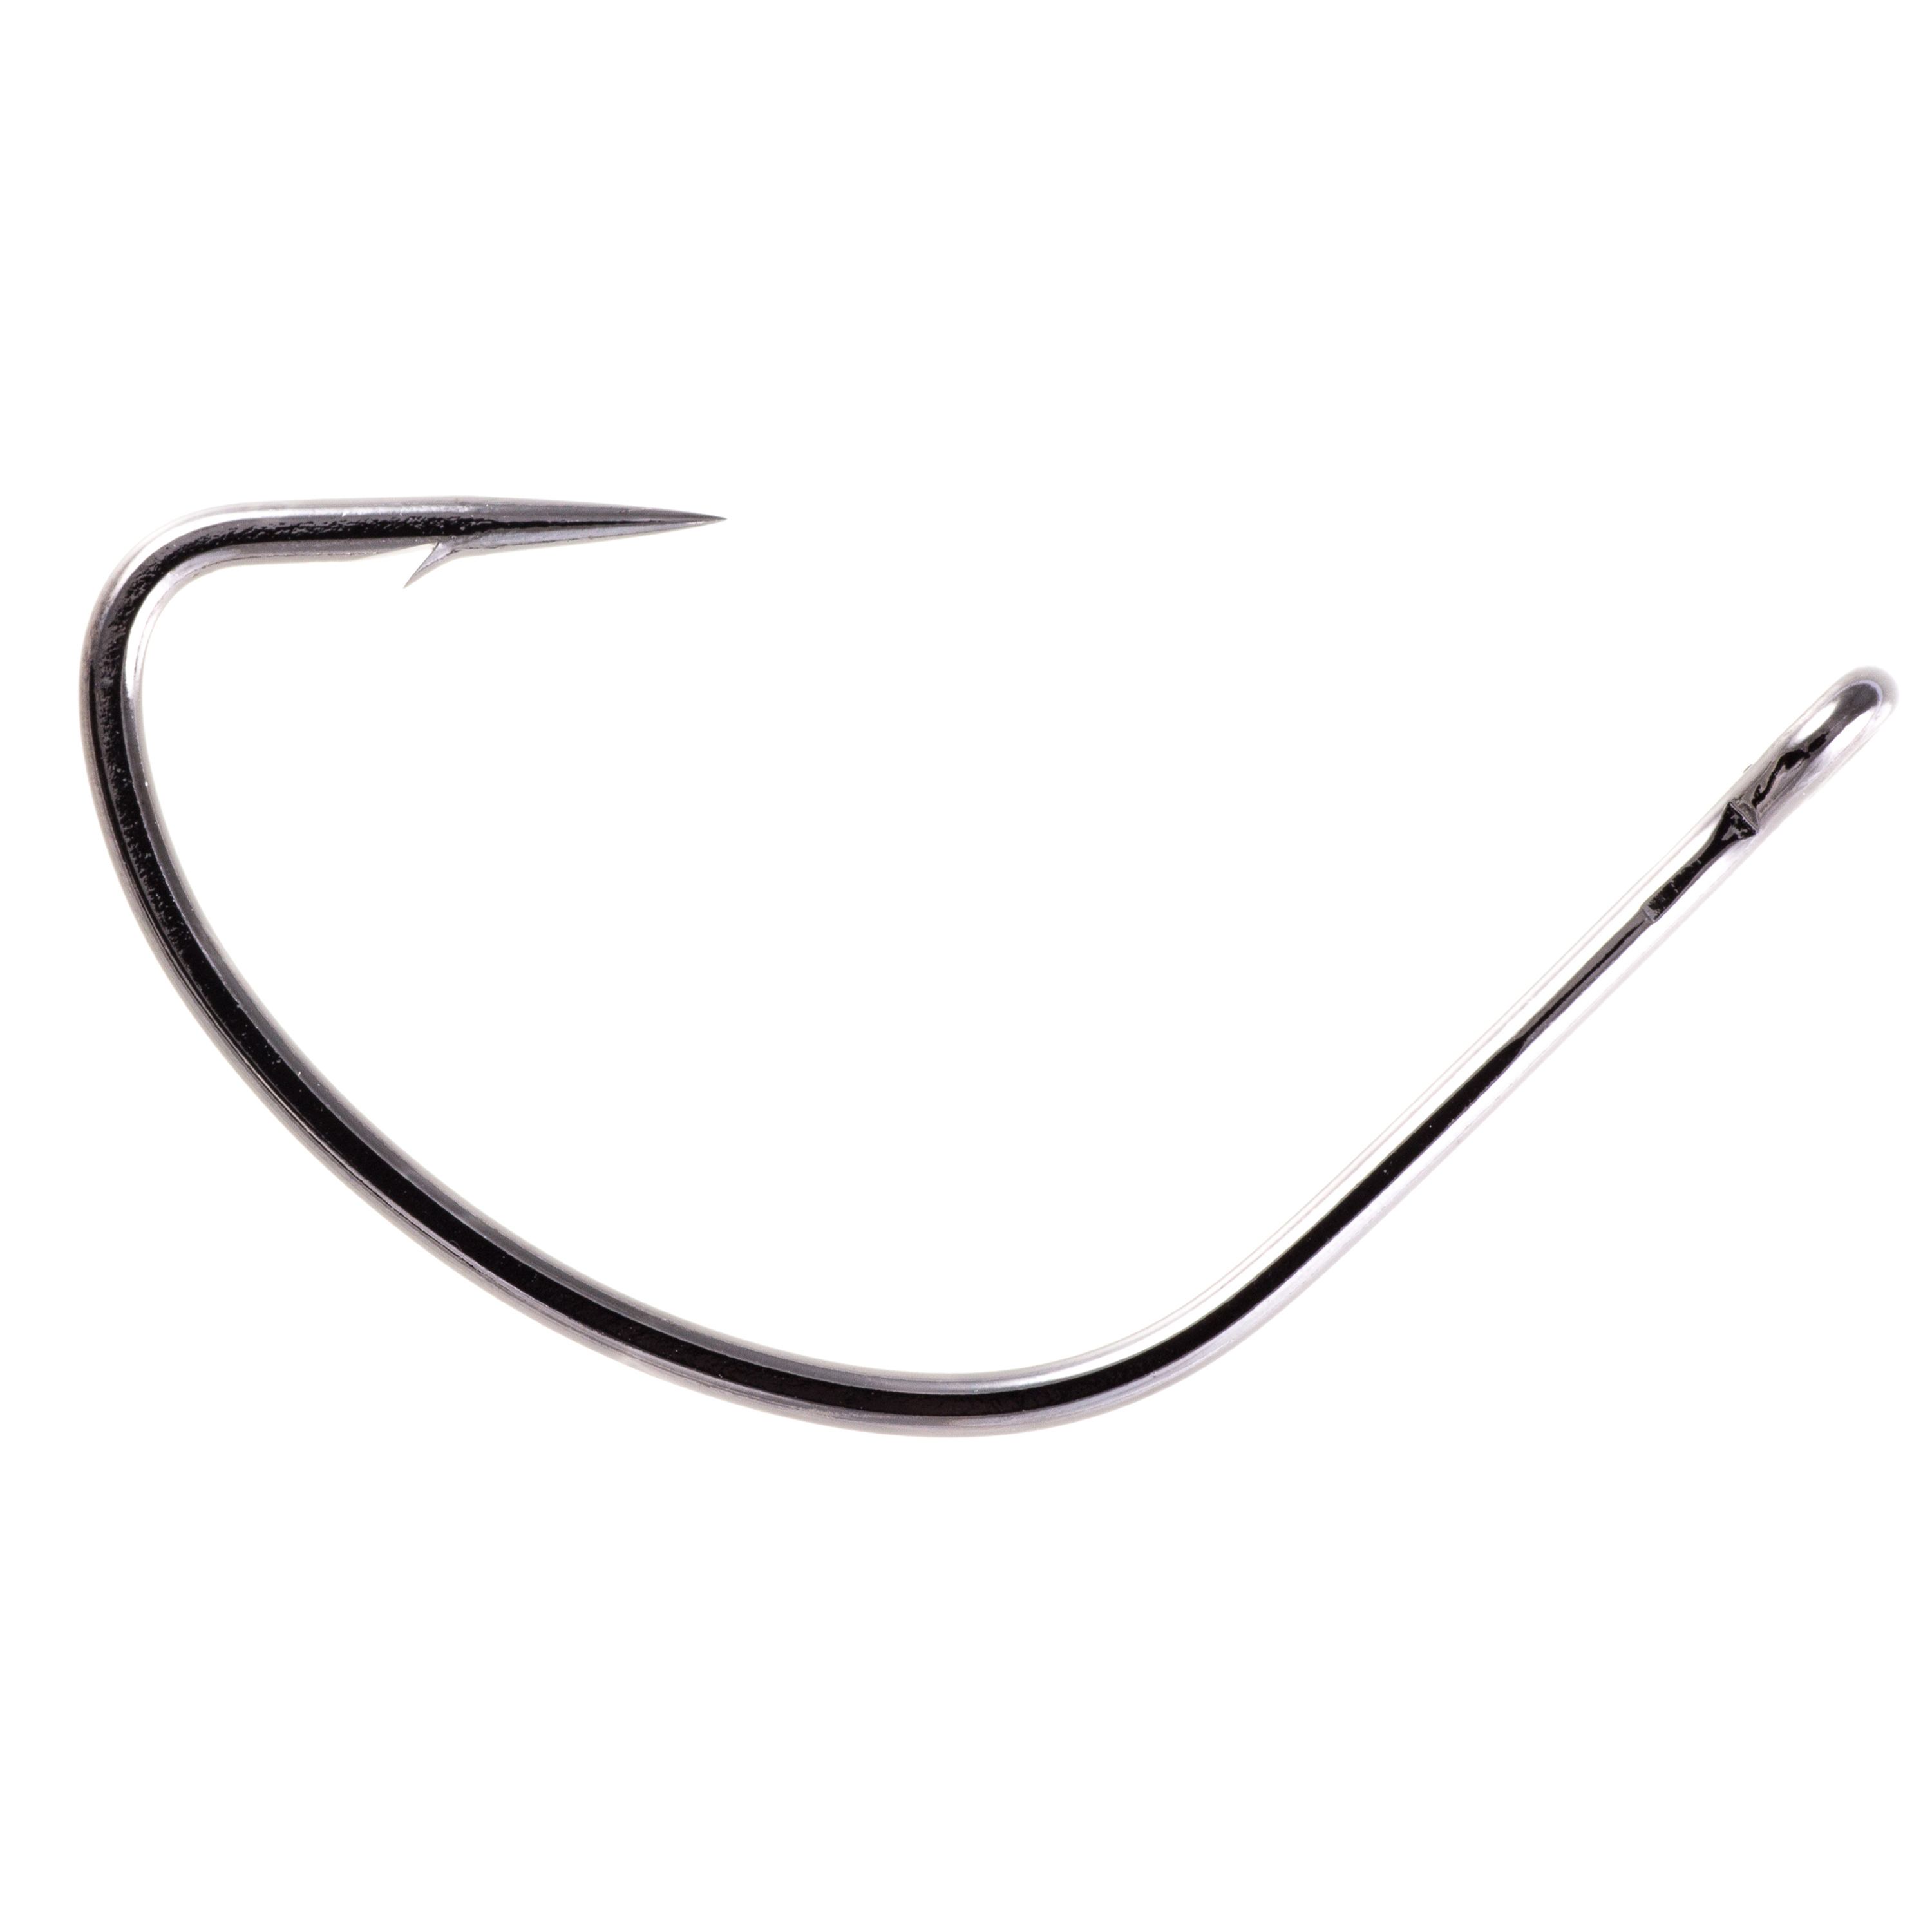 Straight shank hooks, for what & why besides flipping? - Fishing